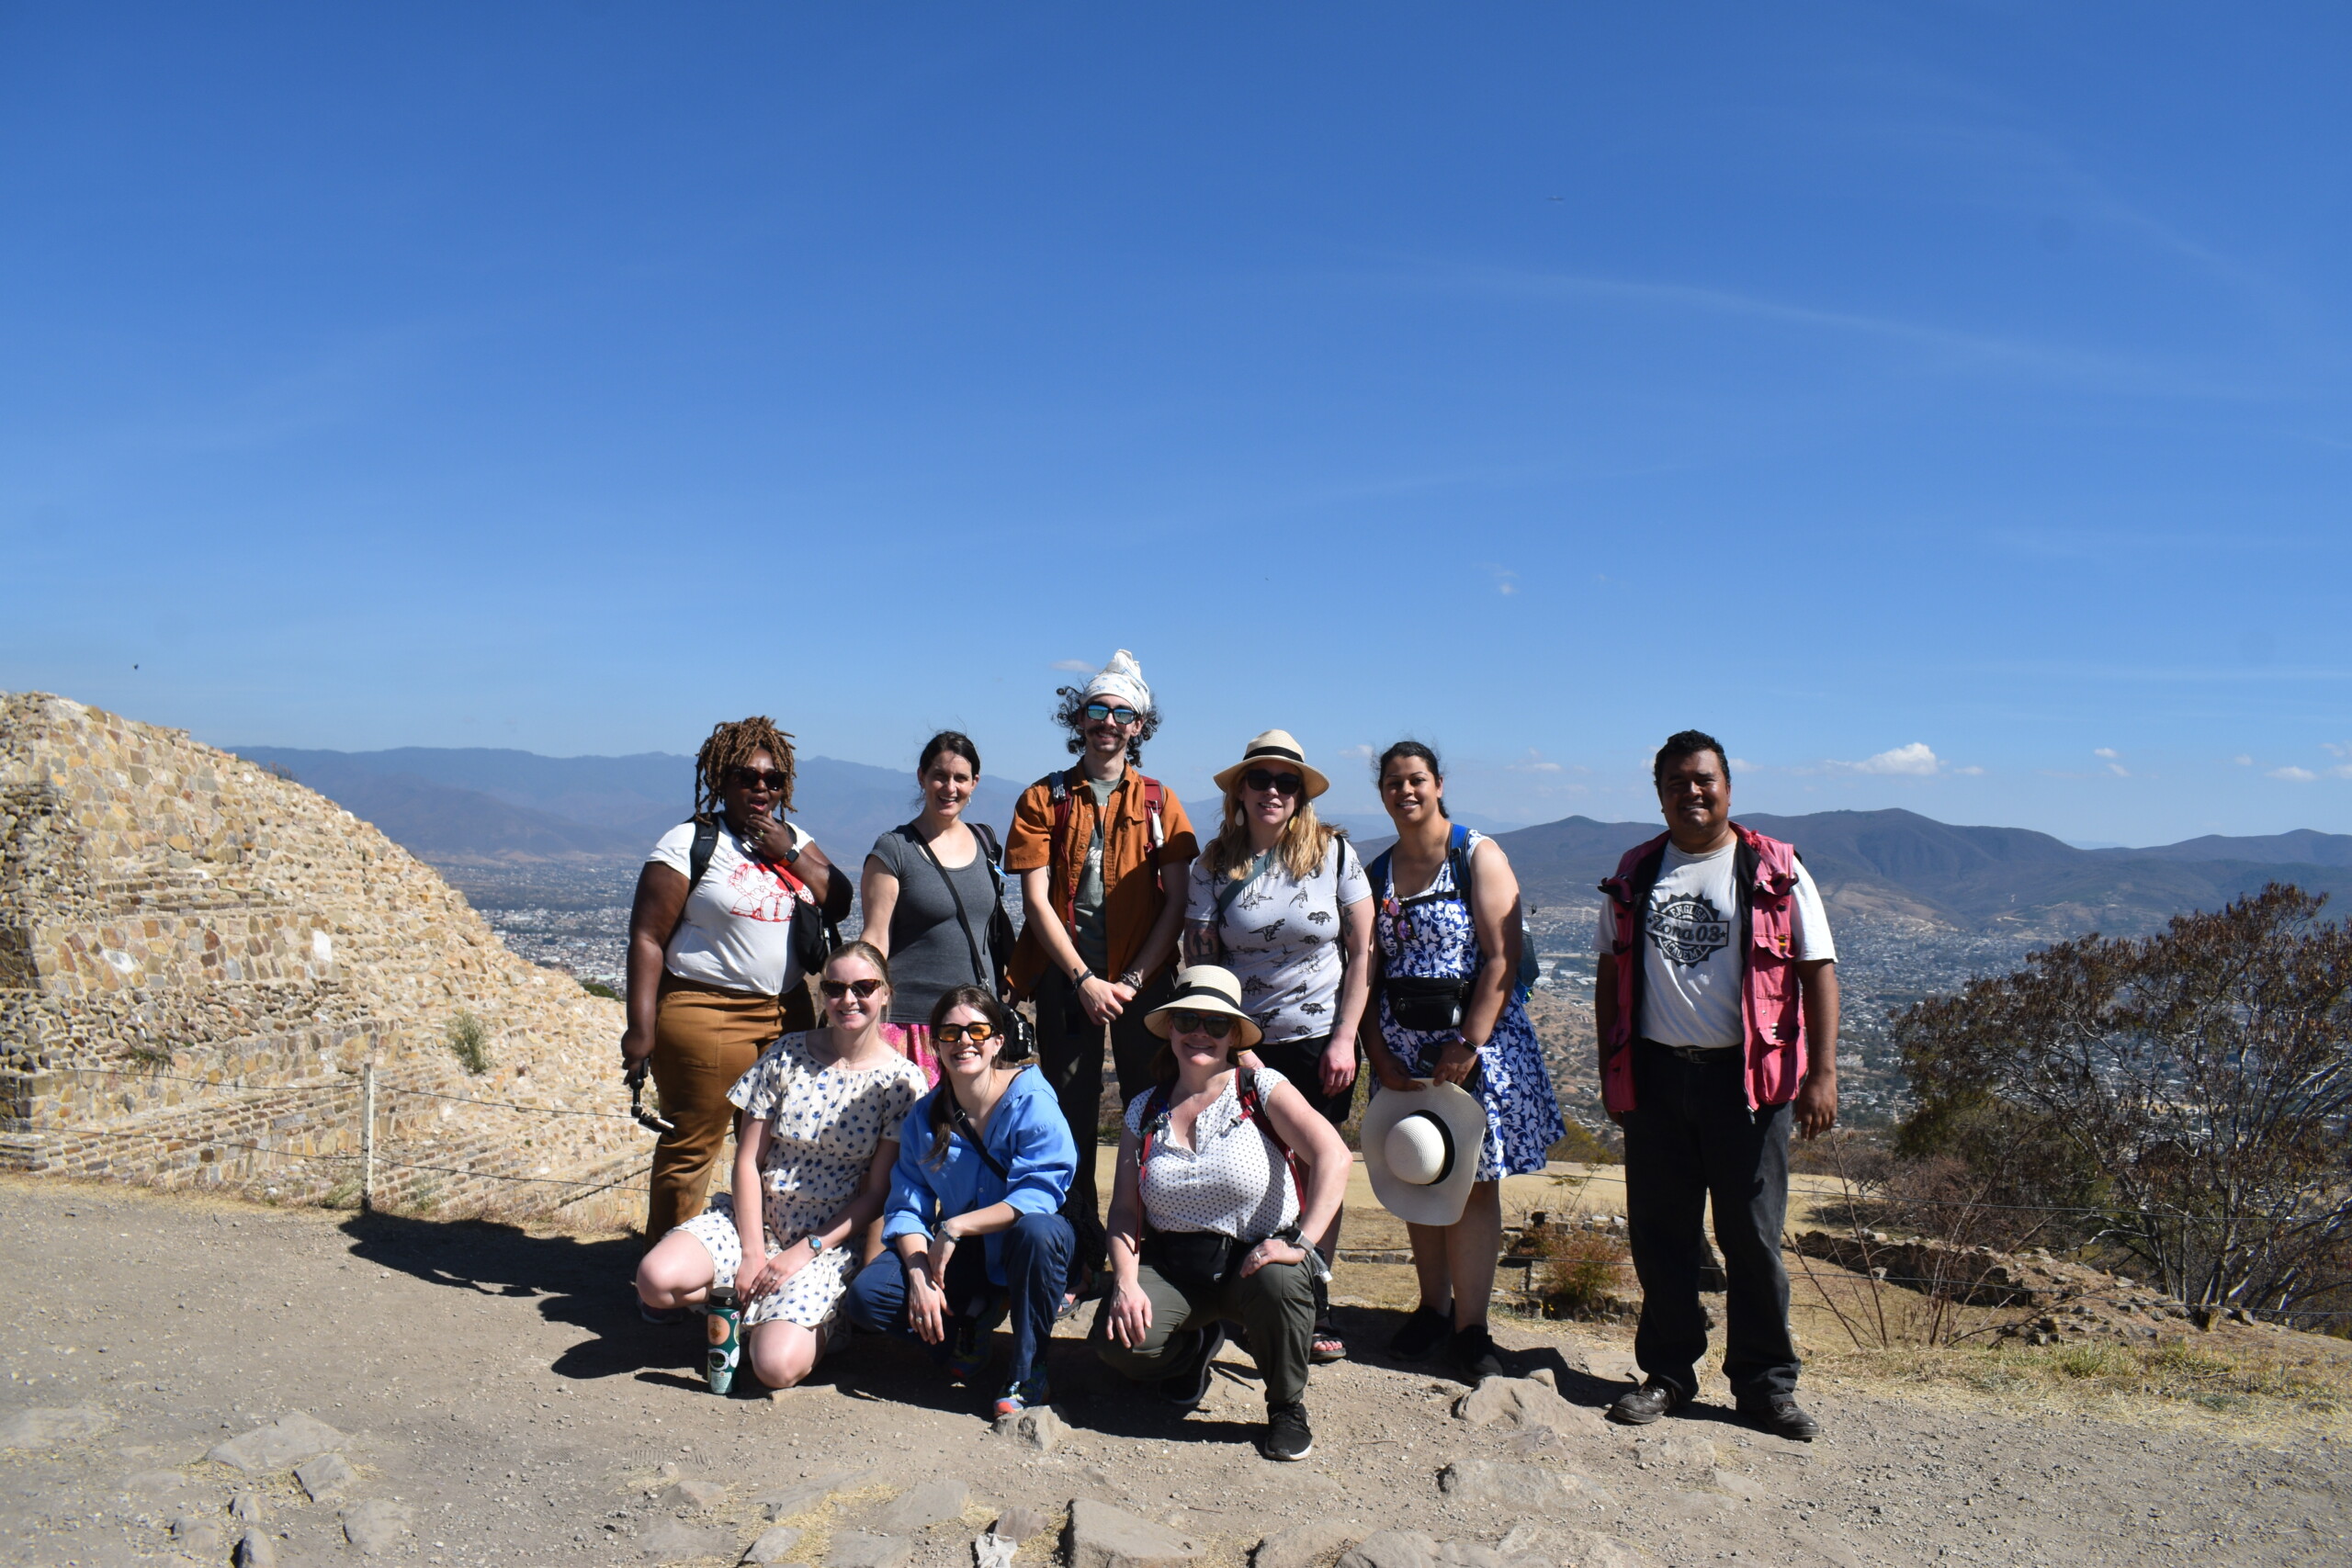 Students studying in Oaxaca, Mexico stand as a group with on a mountain with the landscape in the background and smile into the camera.